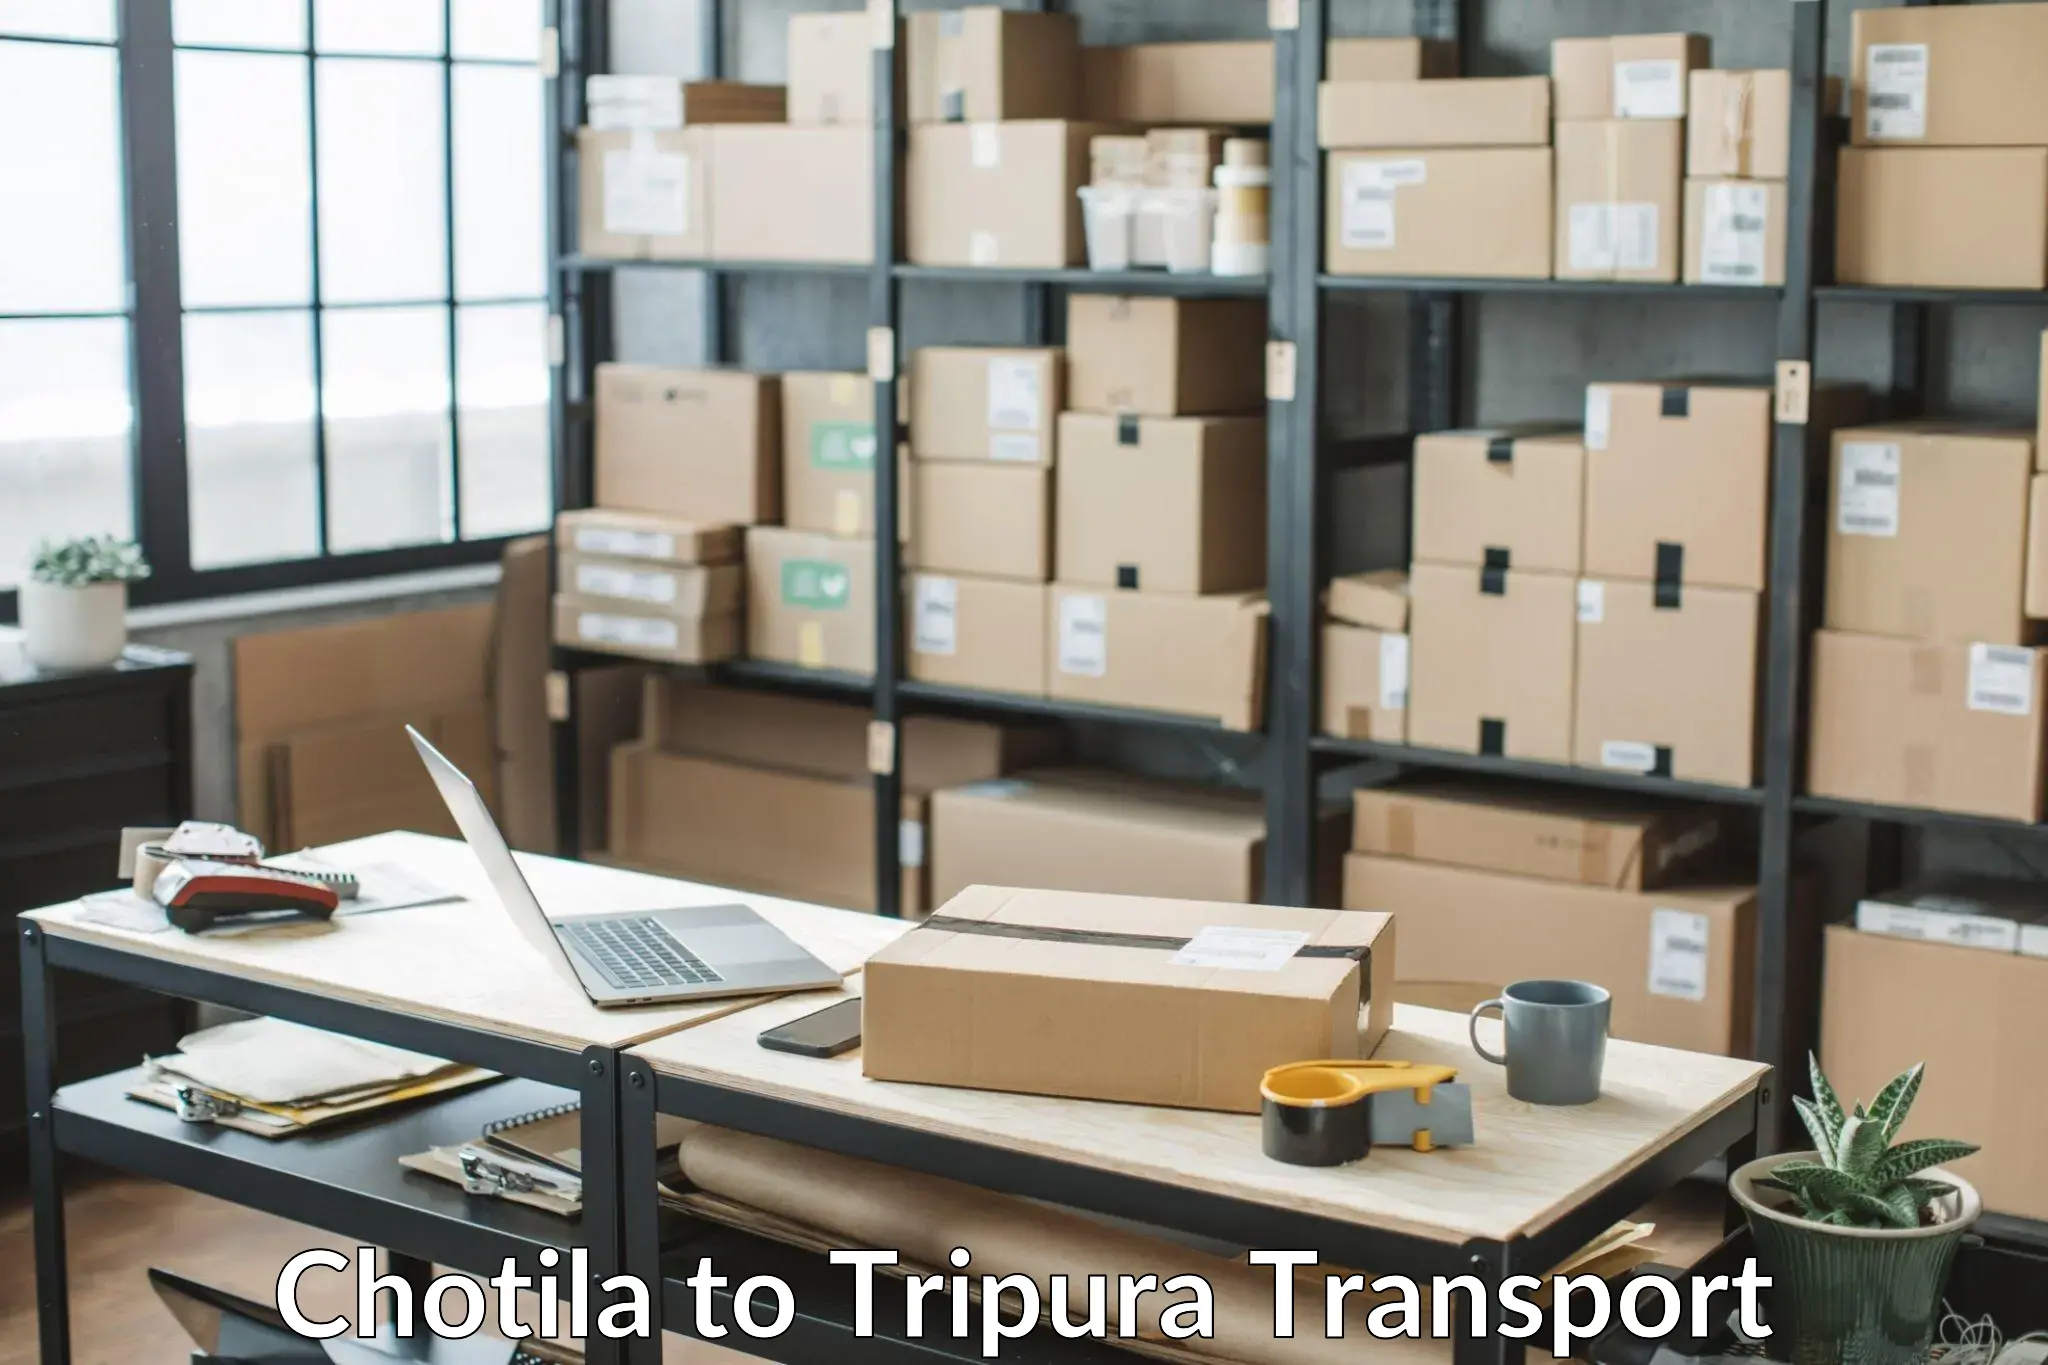 Two wheeler transport services in Chotila to Udaipur Tripura